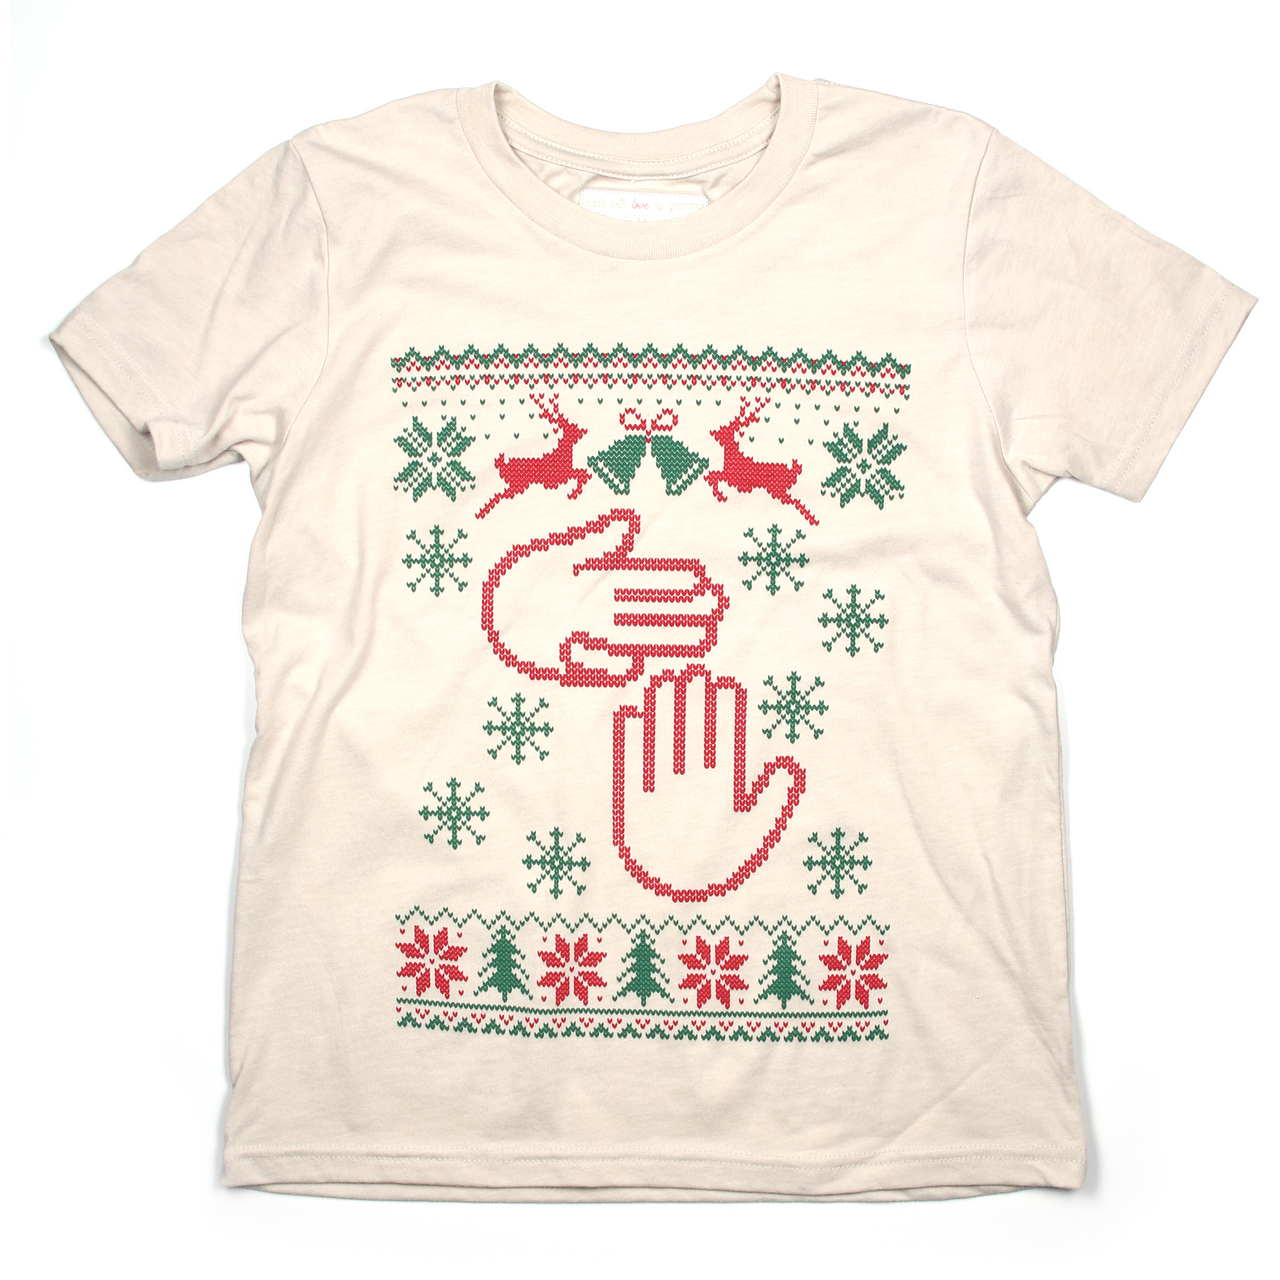 Not-So-Ugly Christmas "Sweater" Tee (Youth)